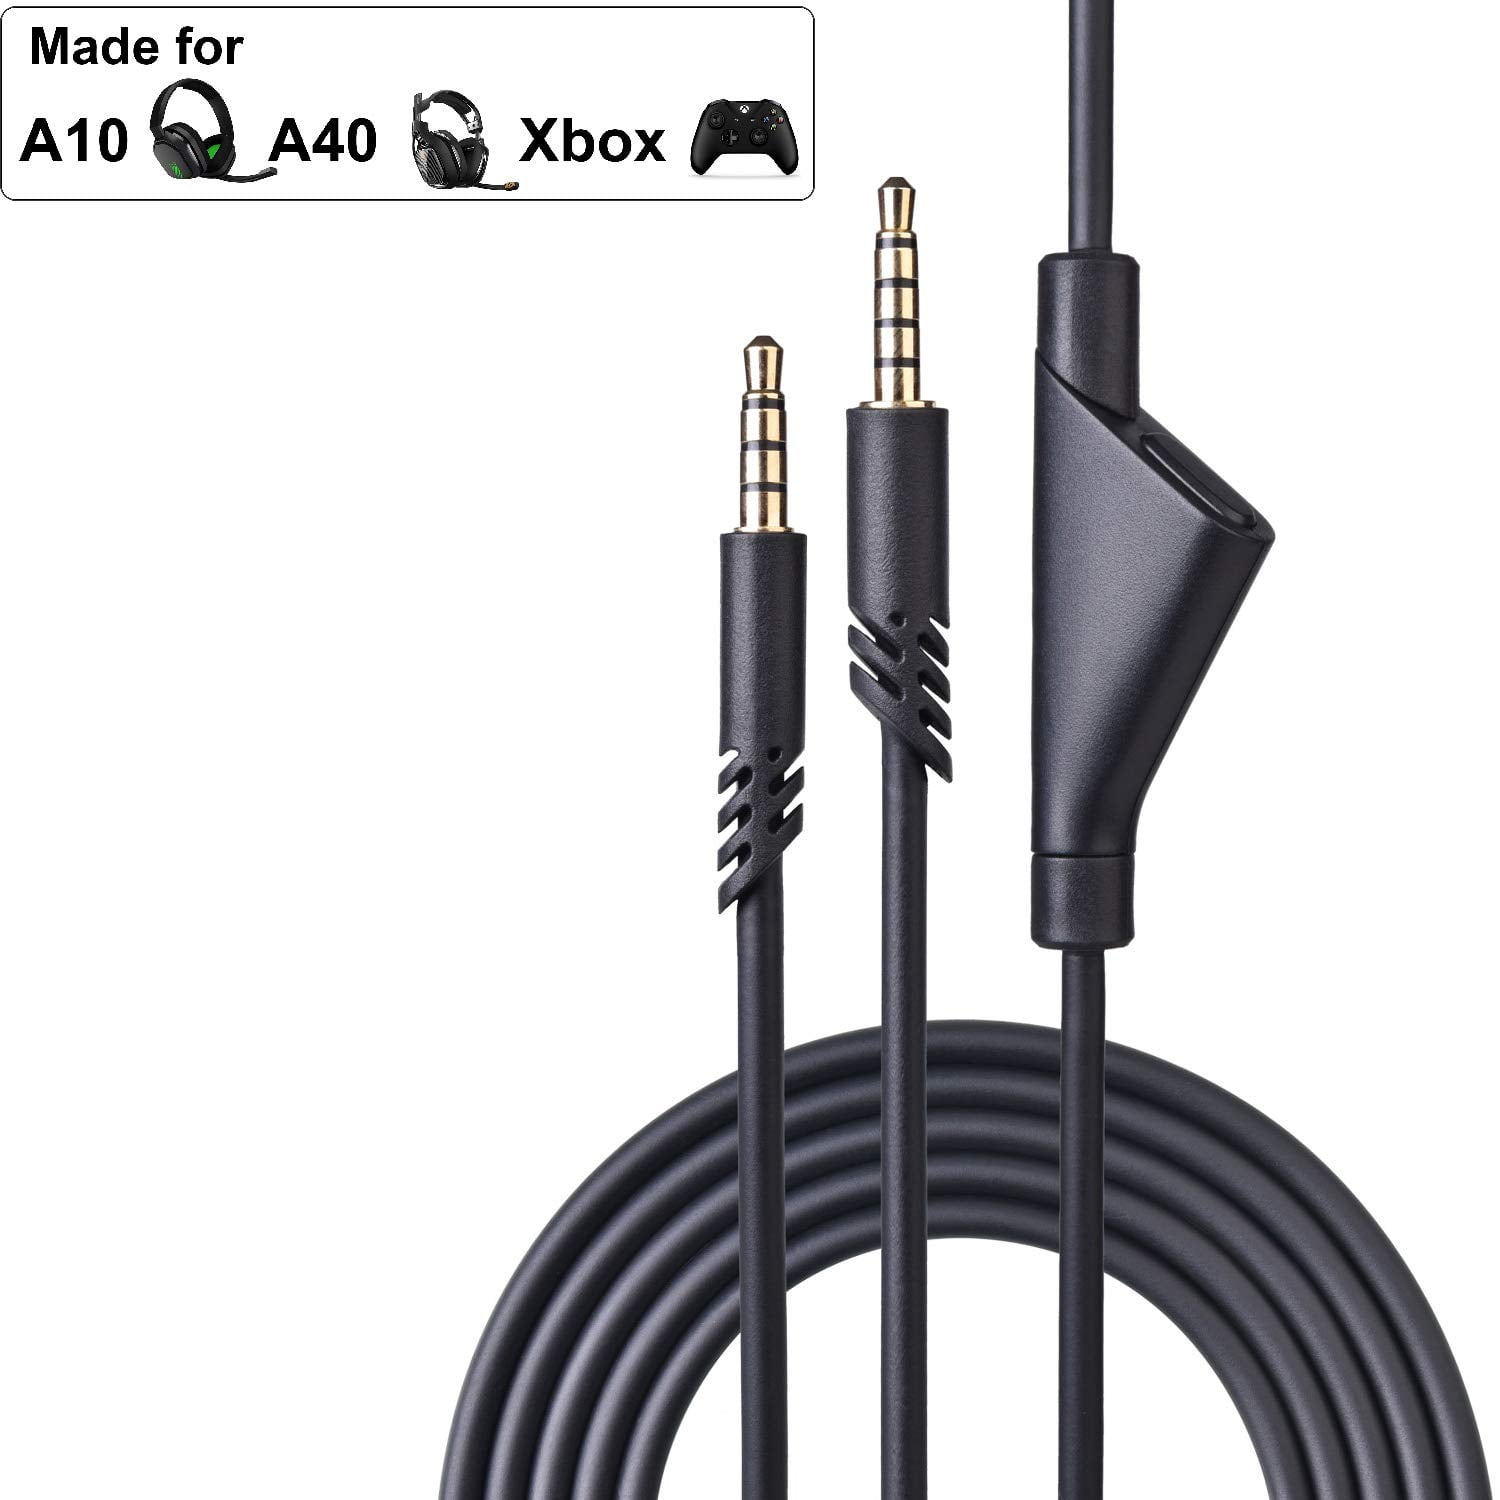 Replacement 2.0M Astro A10 Volume Cable Cord with Volume Control Function Also Works with A40/A40TR Gaming Headsets Xbox one ps4 Controller 